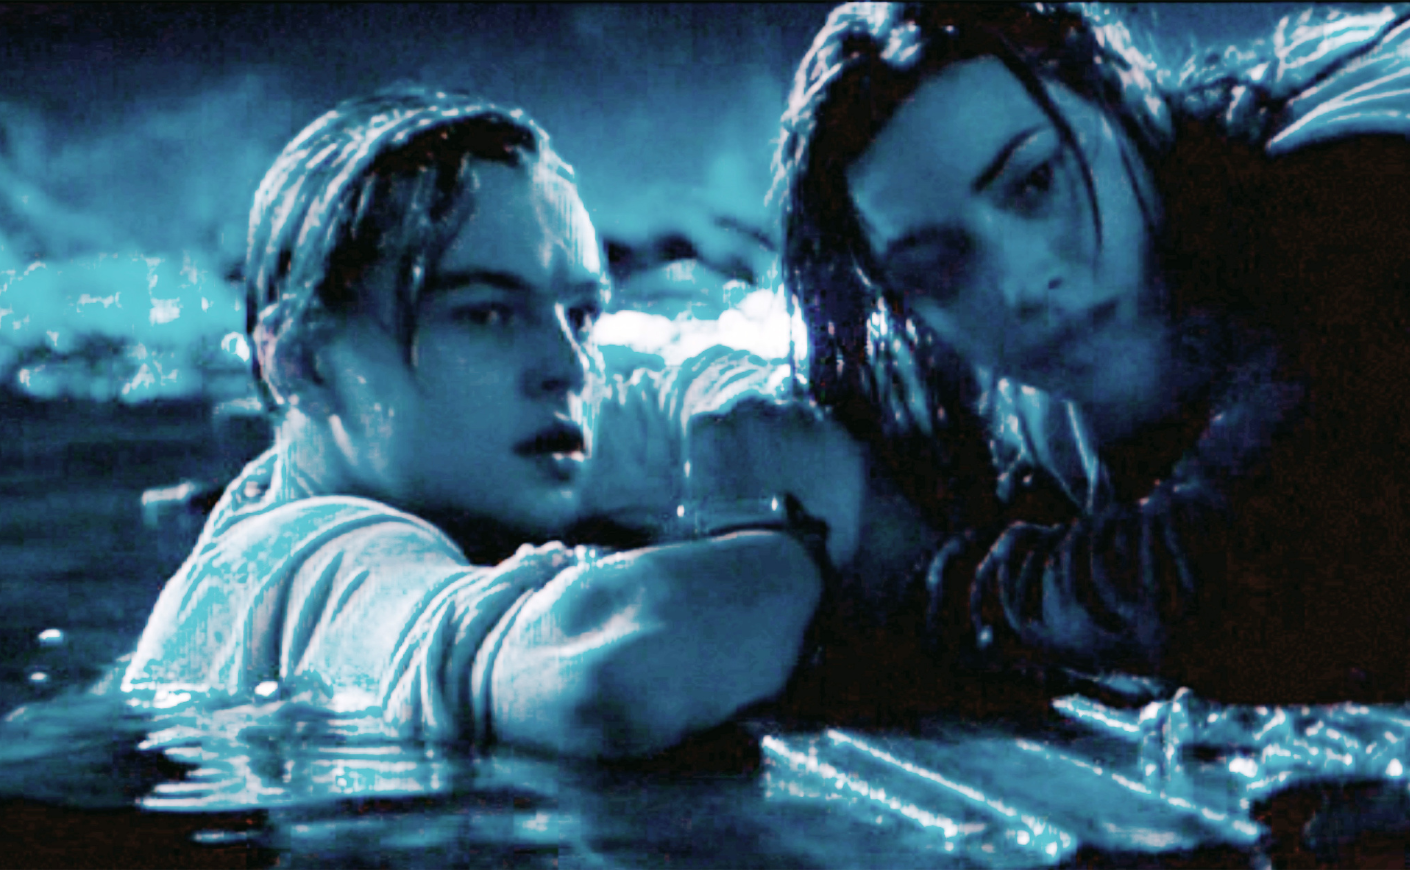 A still from Titanic showing Jack and Rose in the water